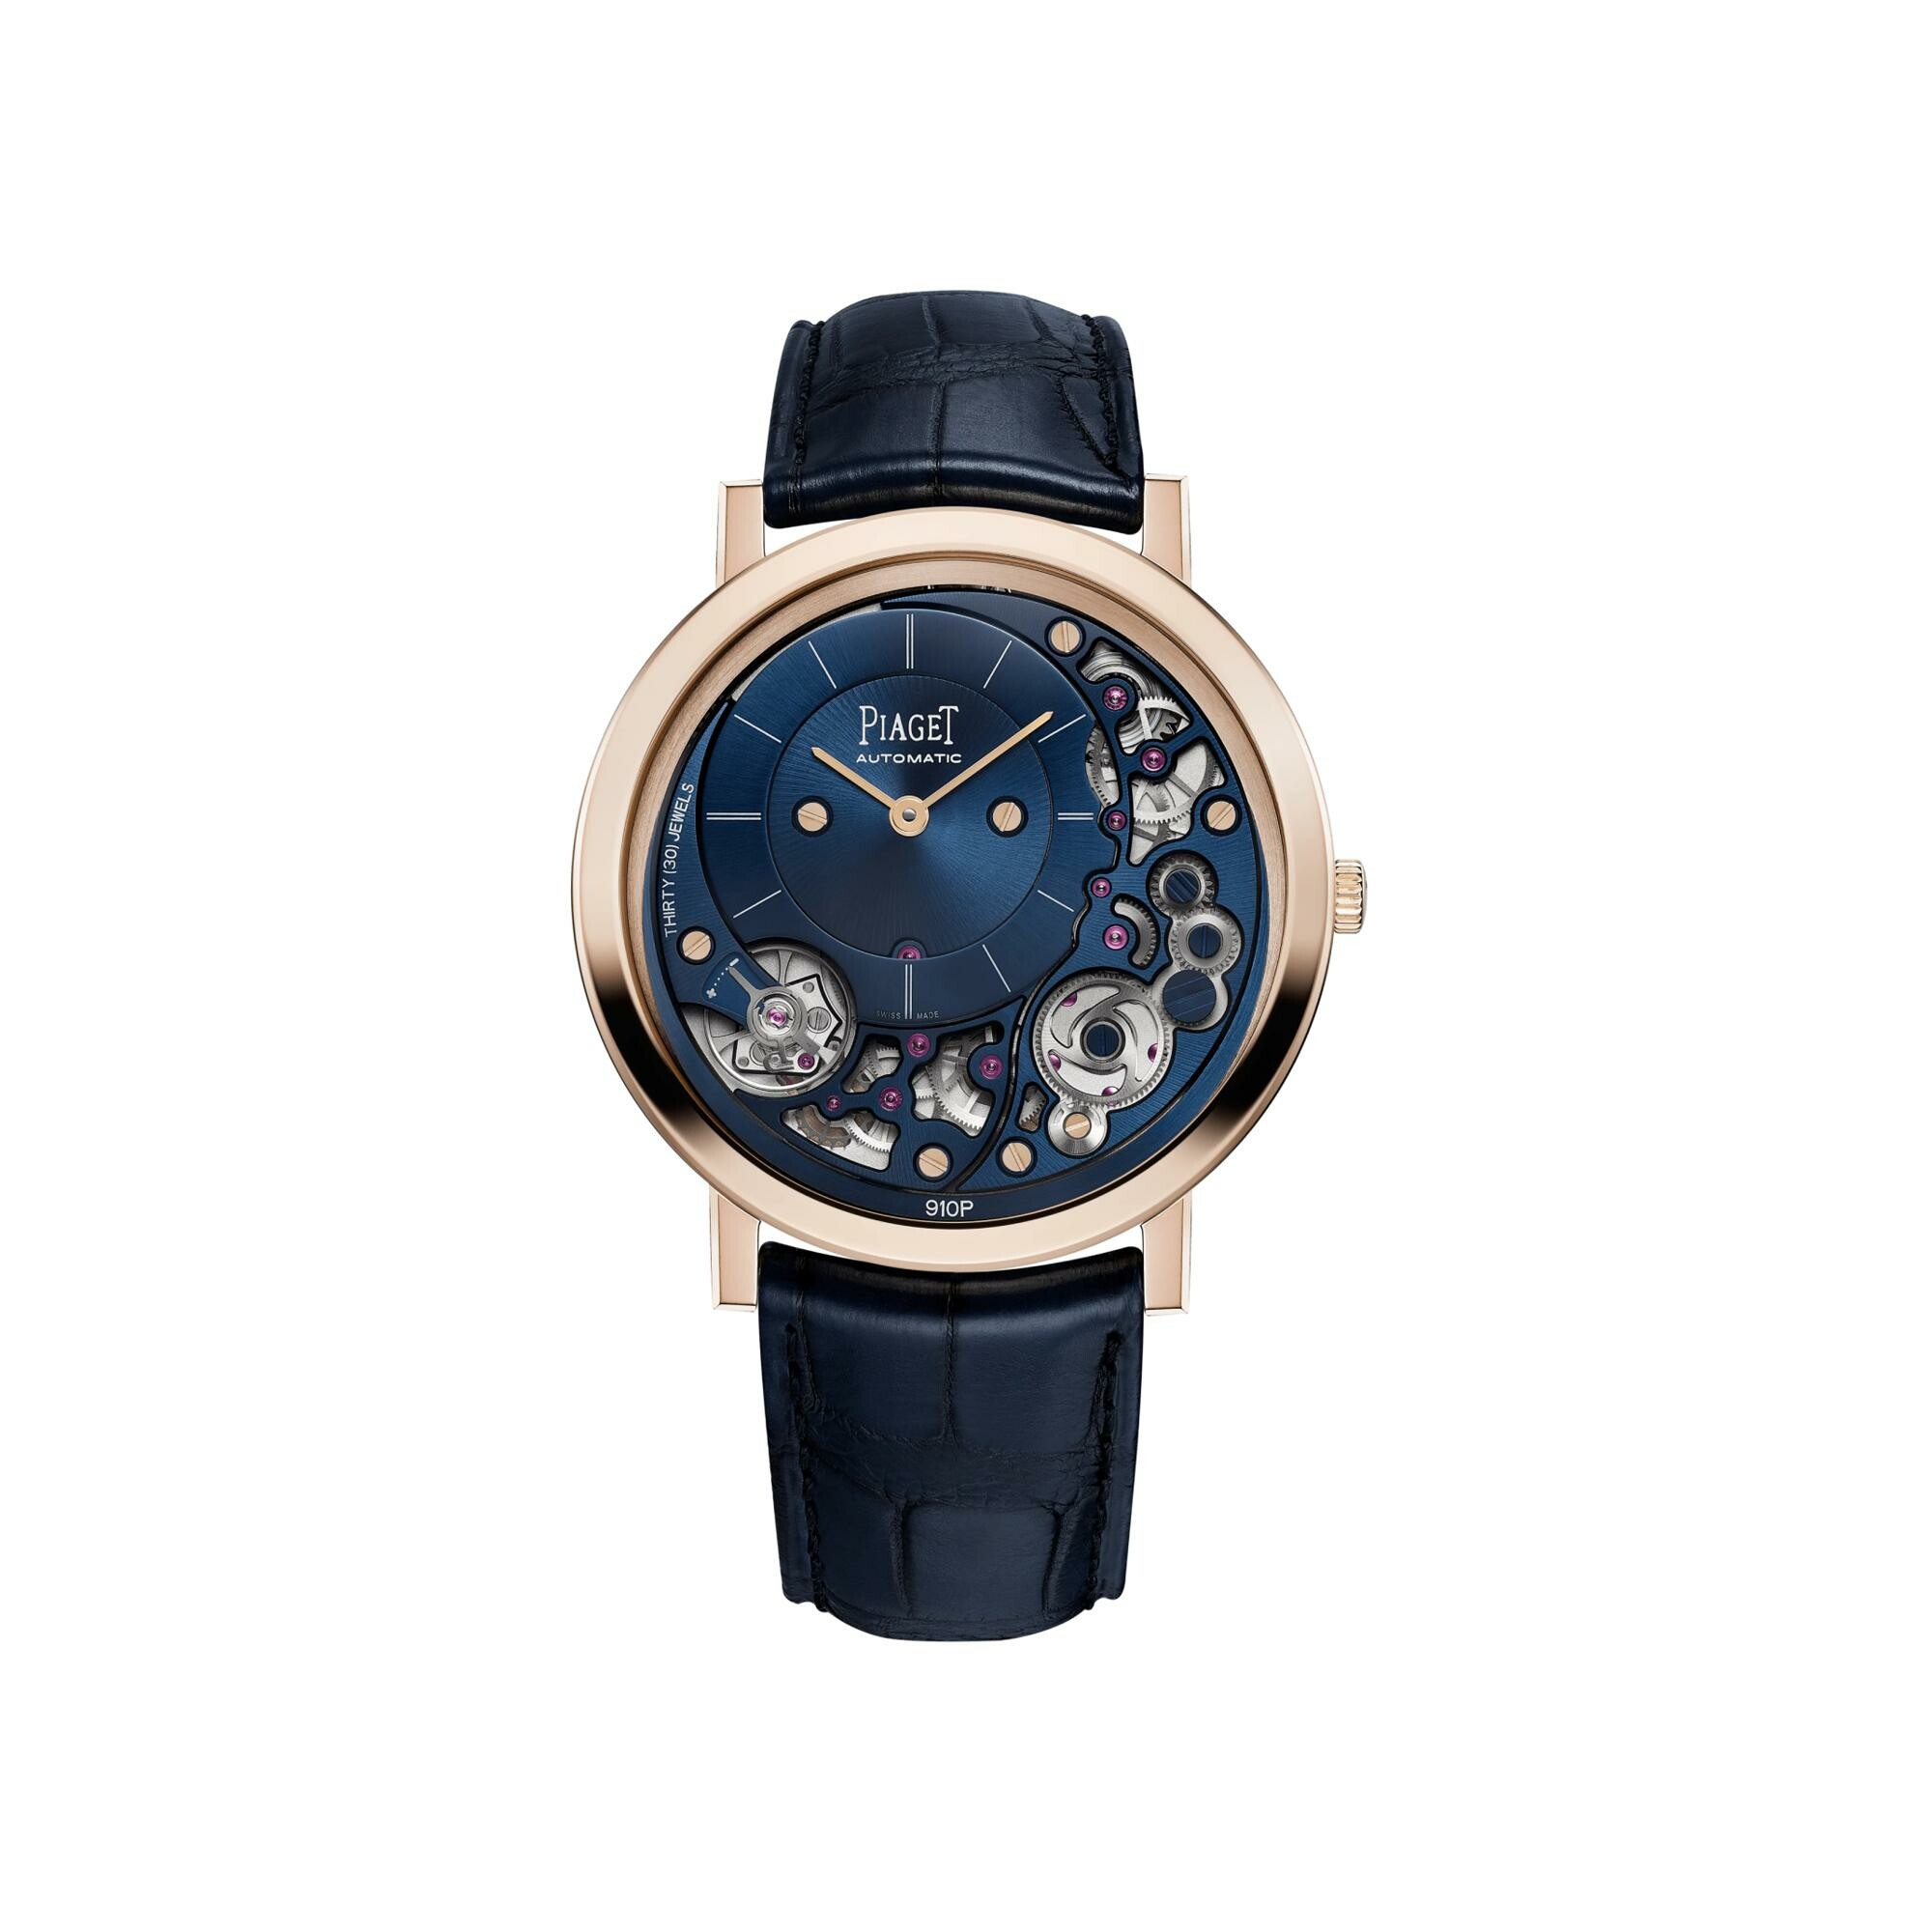 World's Thinnest Mechanical Watch, Piaget Altiplano 900 – Professional  Watches